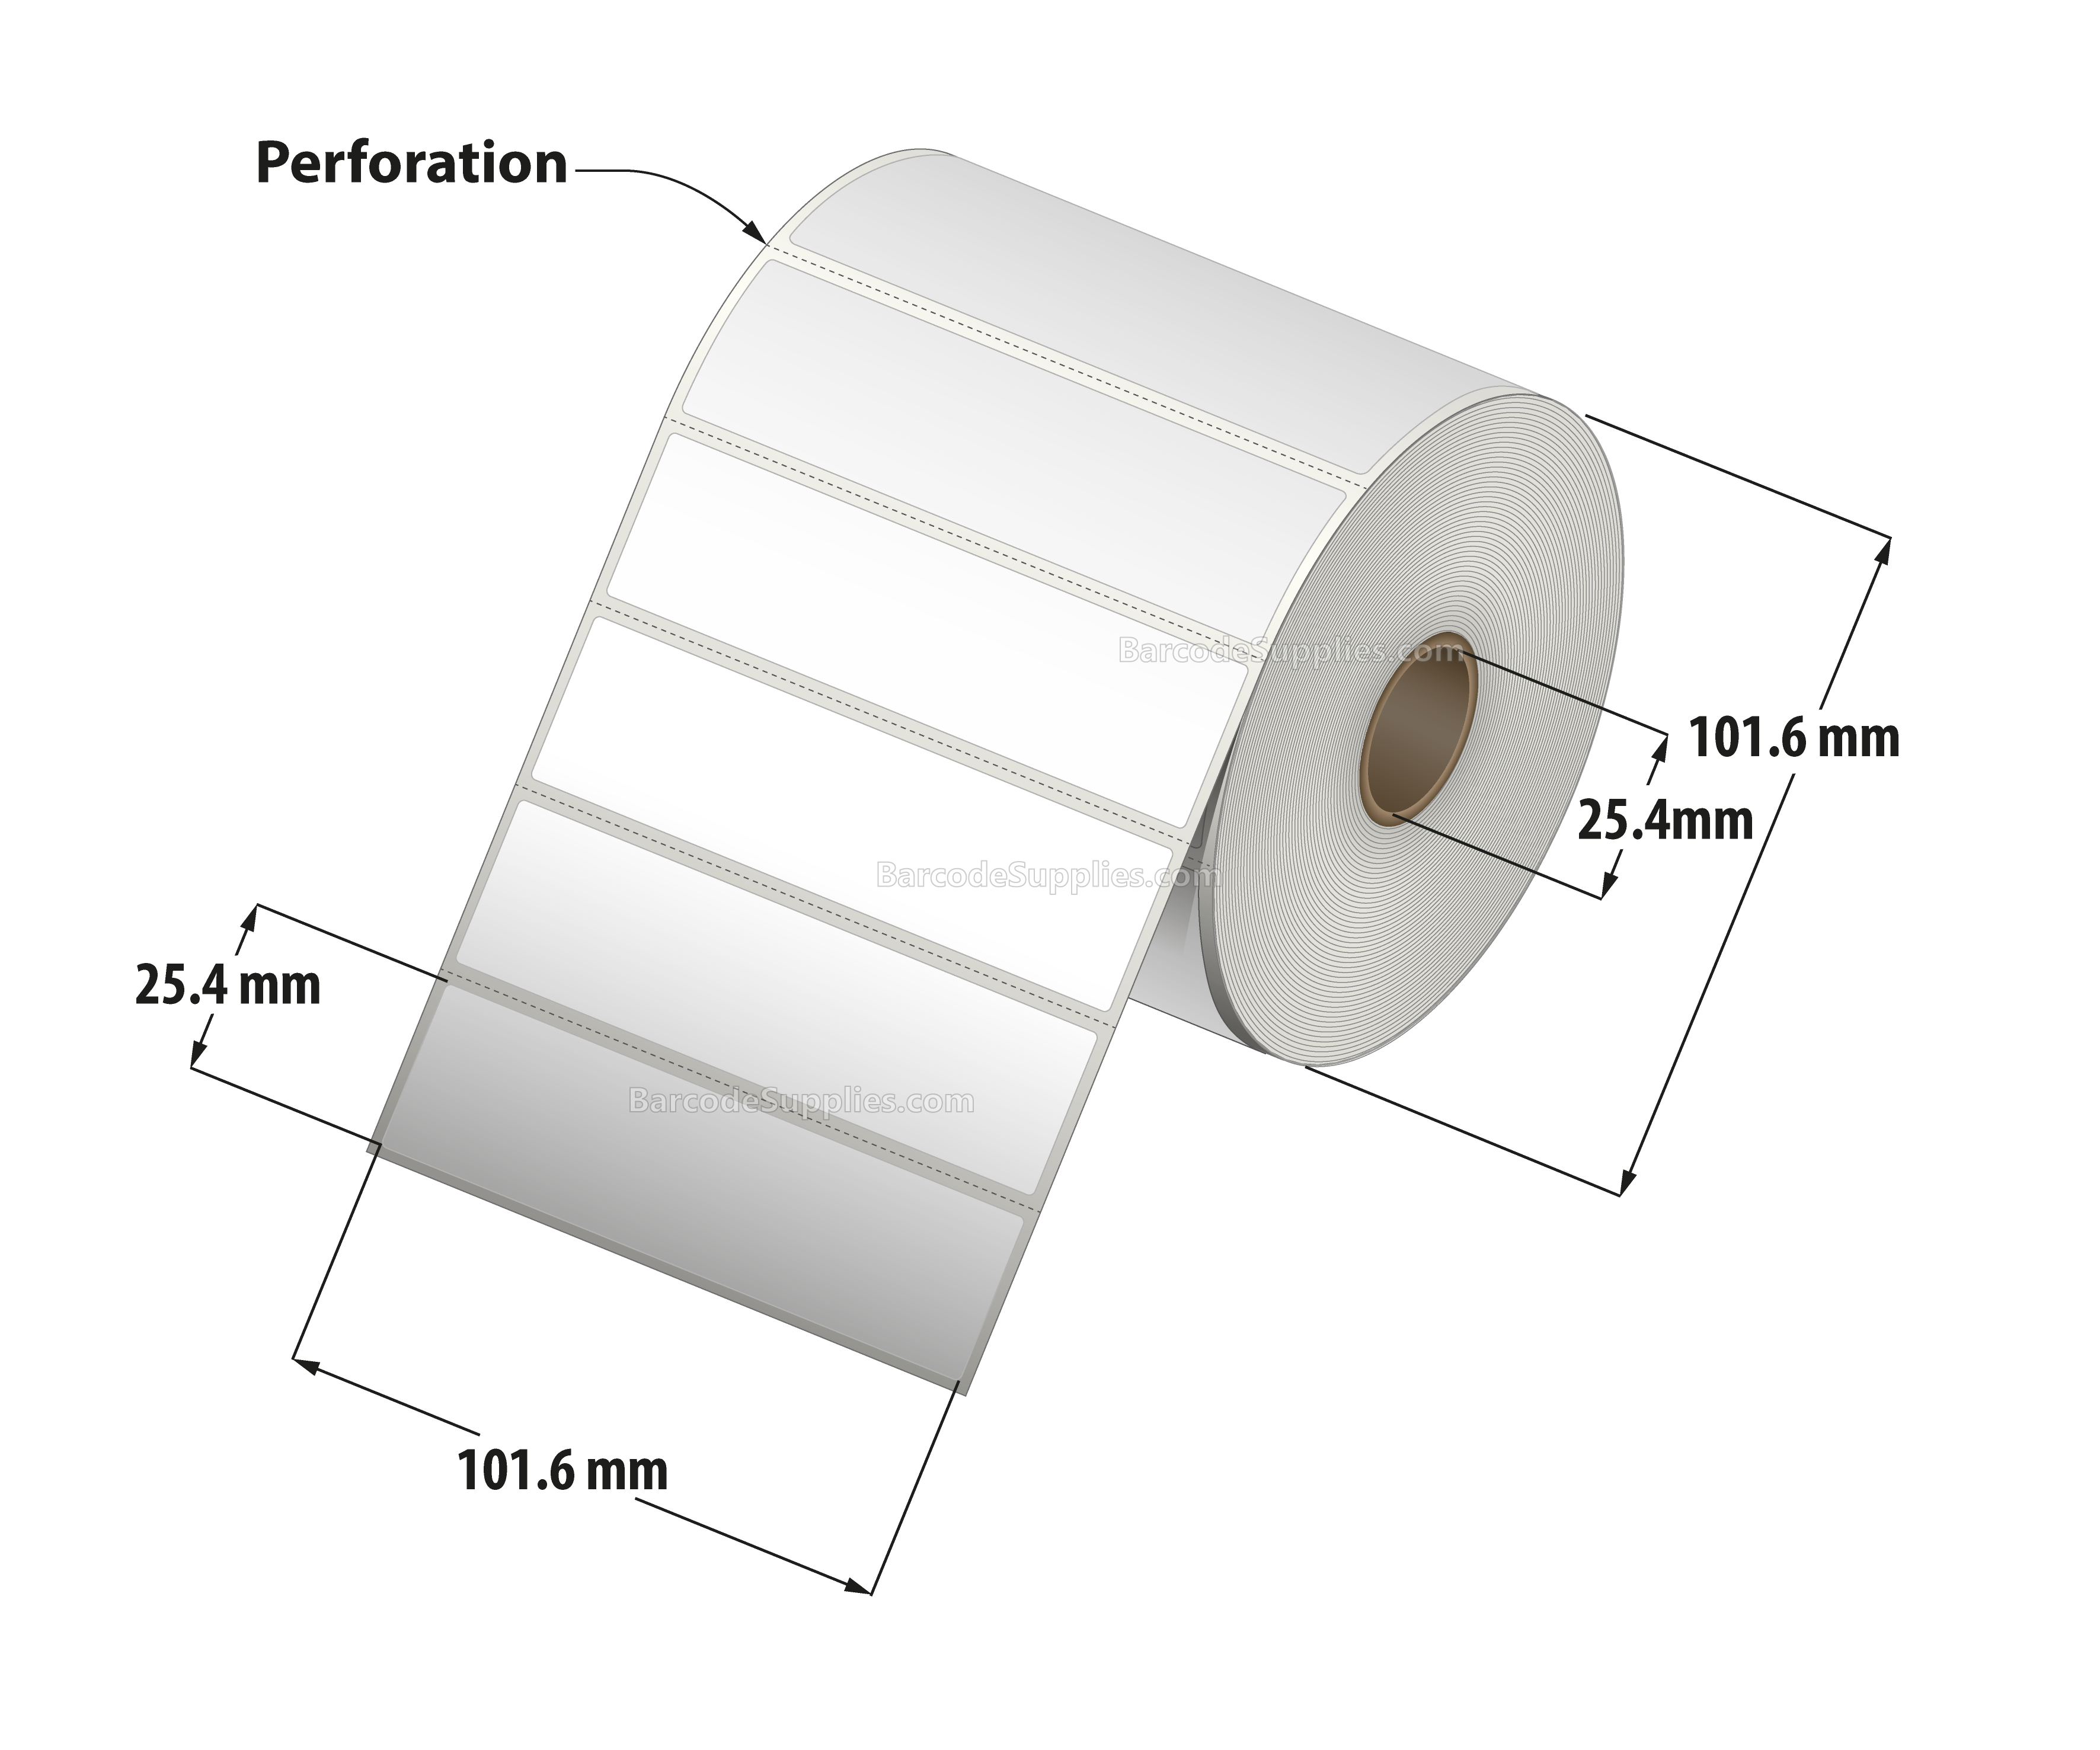 4 x 1 Thermal Transfer White Labels With Permanent Adhesive - Perforated - 1375 Labels Per Roll - Carton Of 12 Rolls - 16500 Labels Total - MPN: RT-4-1-1375-1 - BarcodeSource, Inc.